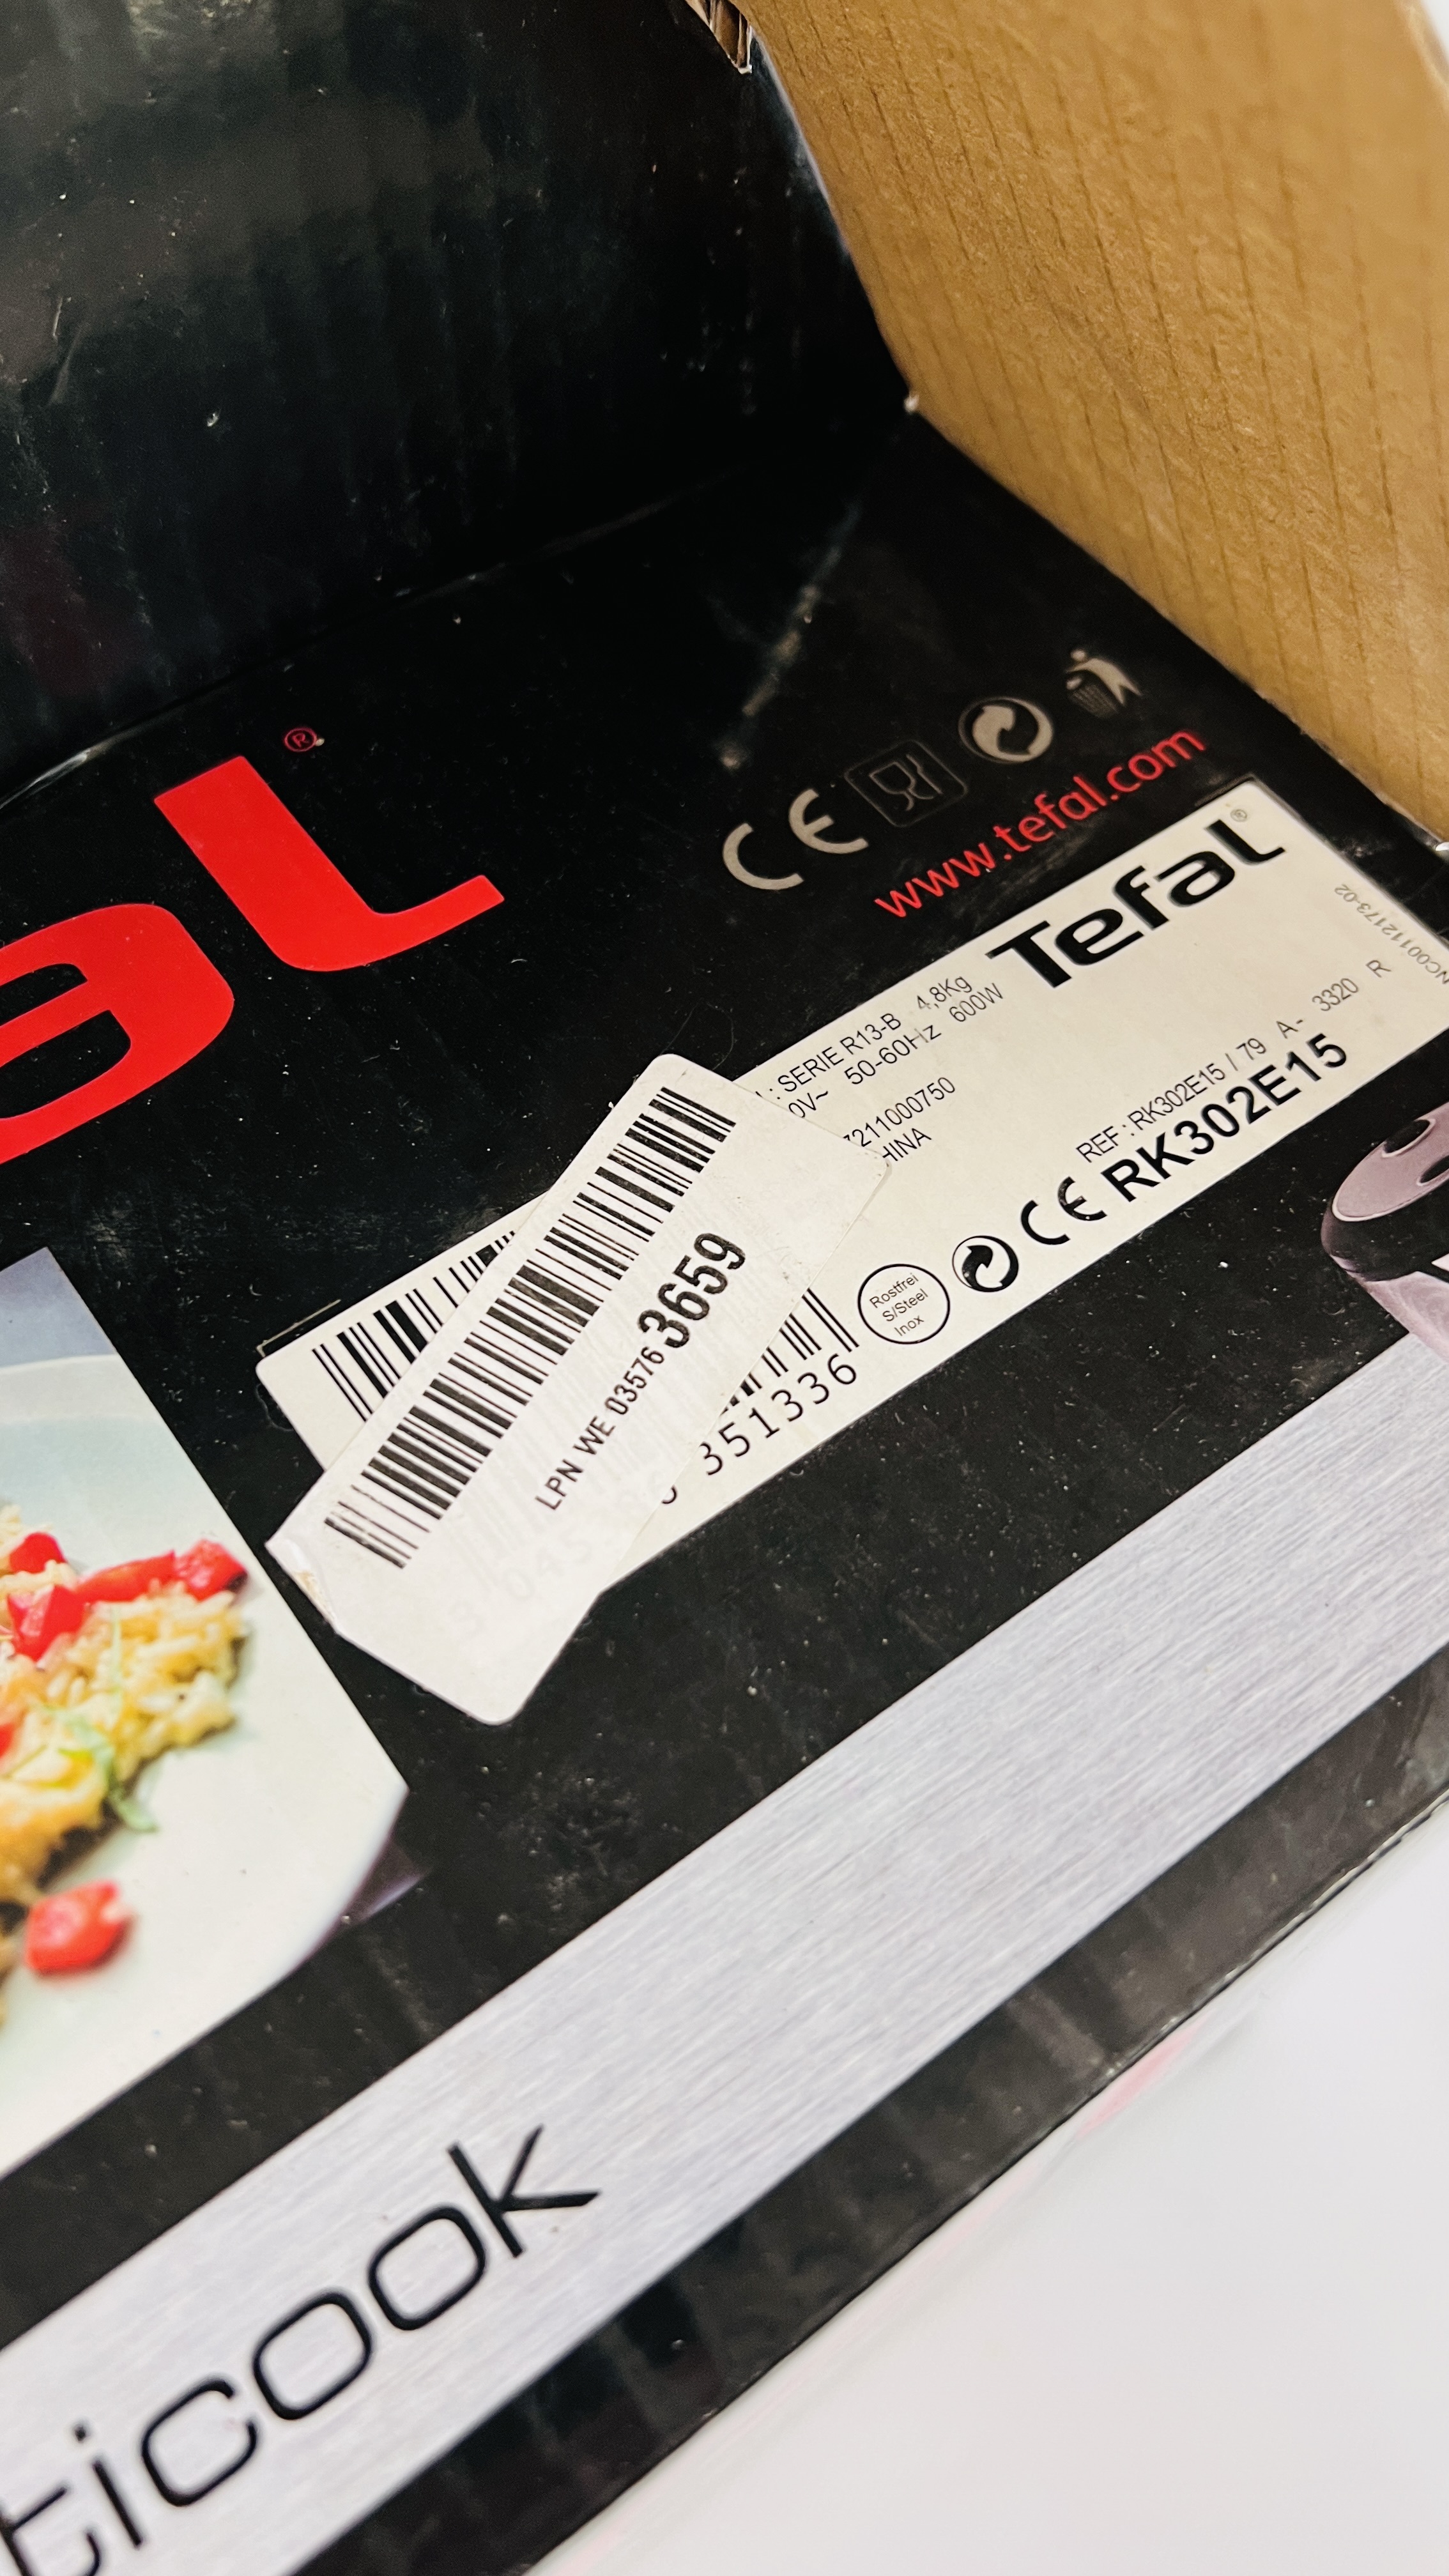 TEFAL MULTI COOK OVEN, BOXED UNUSED - SOLD AS SEEN. - Image 6 of 9